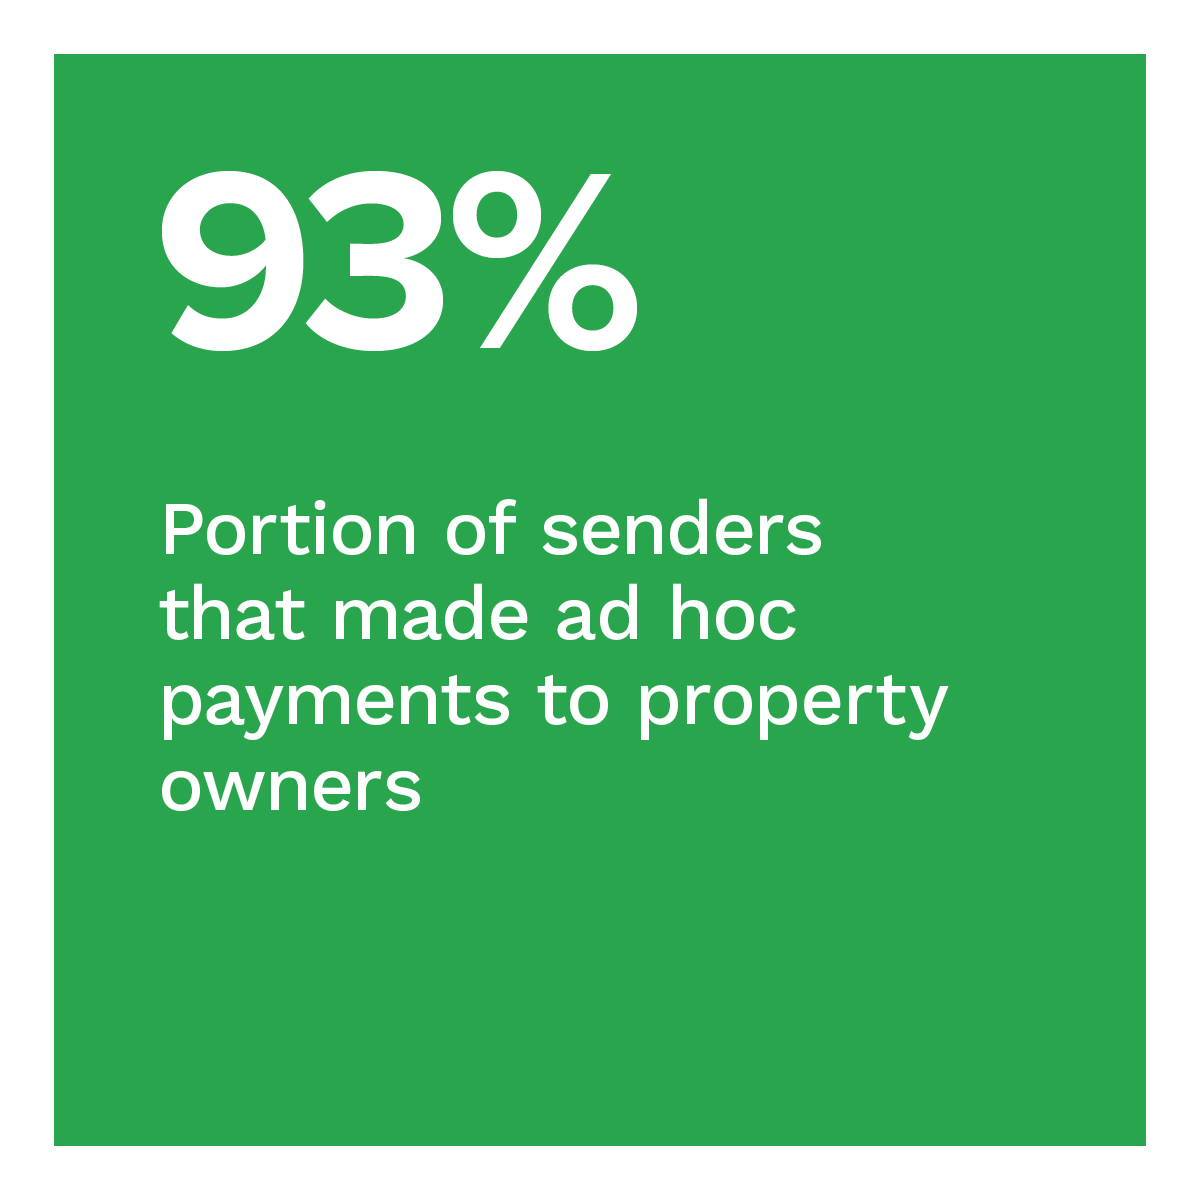 93%: Portion of senders that made ad hoc payments to property owners